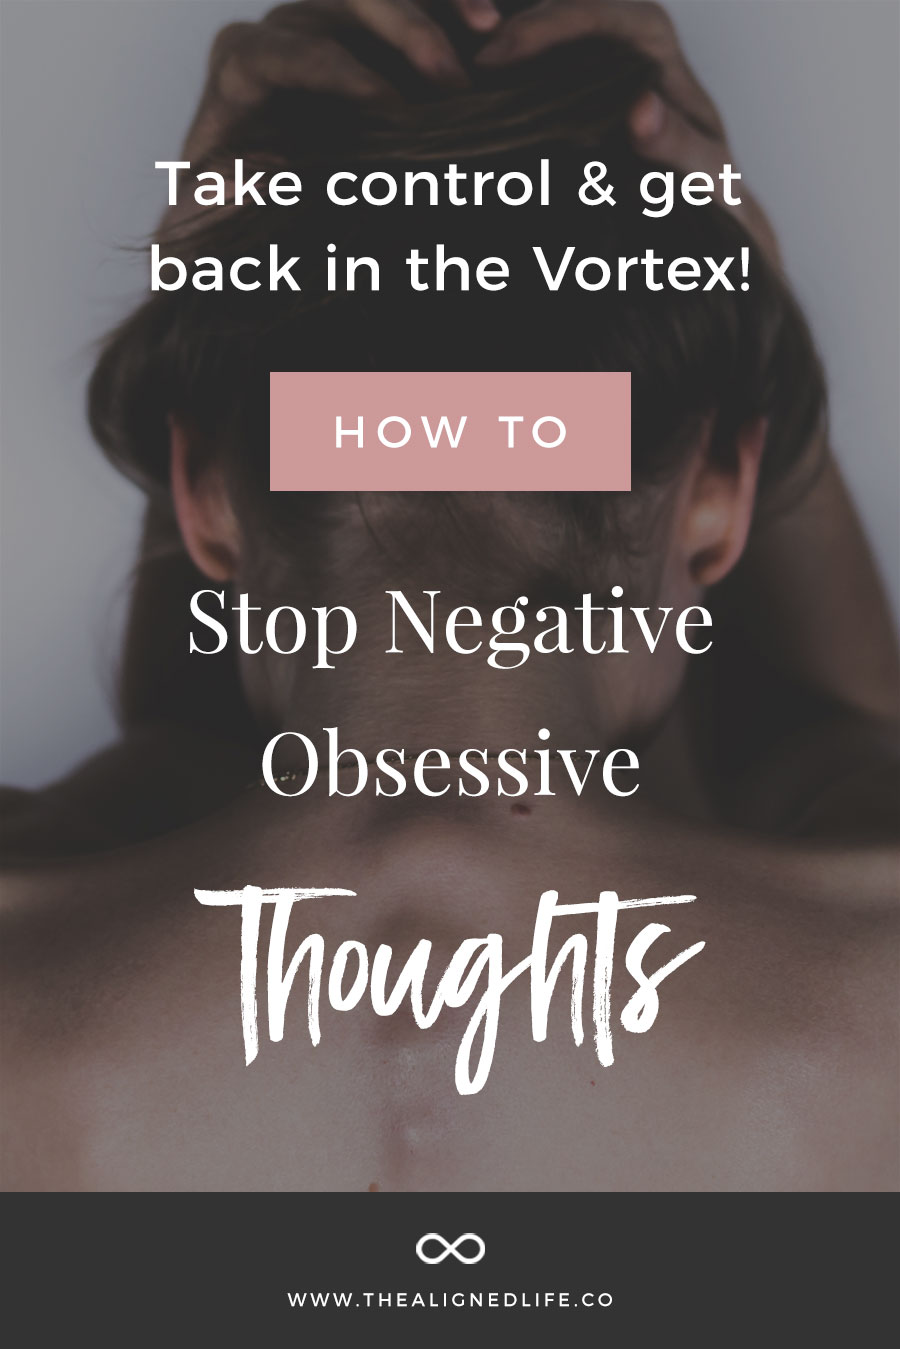 How To Stop Negative Obsessive Thoughts